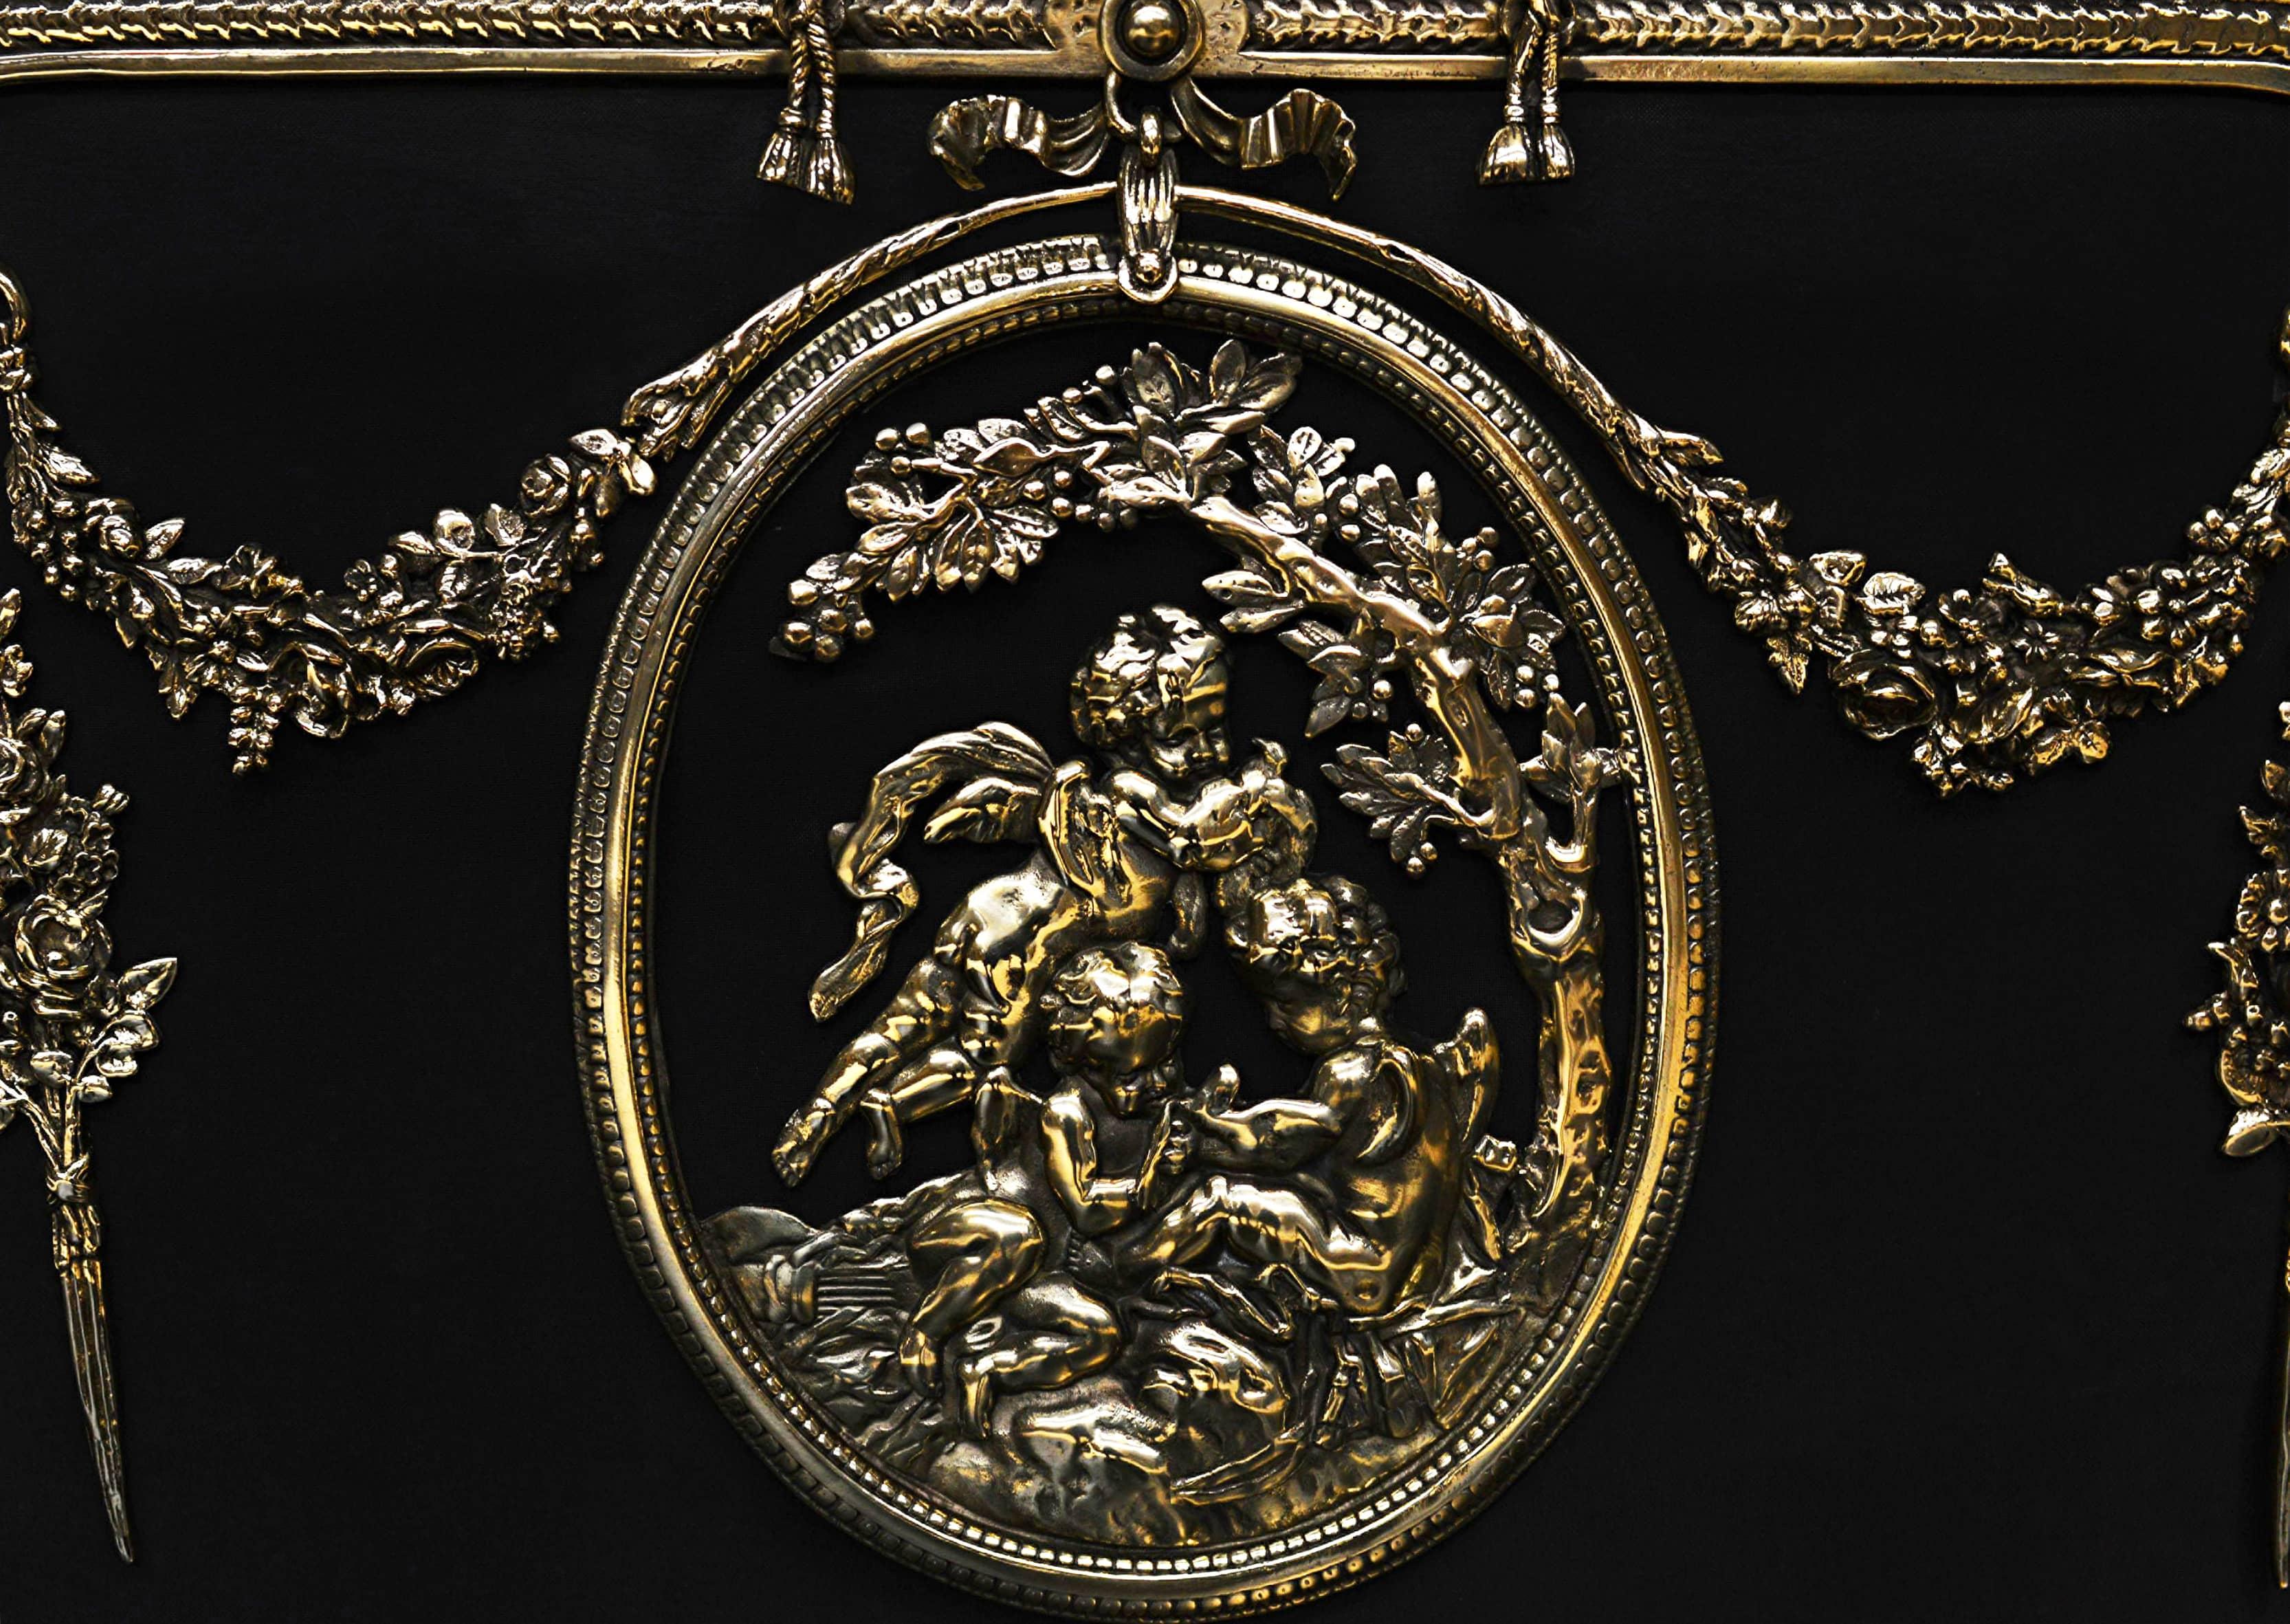 An ornate French Rococo brass firescreen. The hoofed feet surmounted by stiff acanthus leaves and guilloche pattern to outer frame, with rope handle above. The black mesh adorned with swags and central plaque featuring putti and foliage. French,